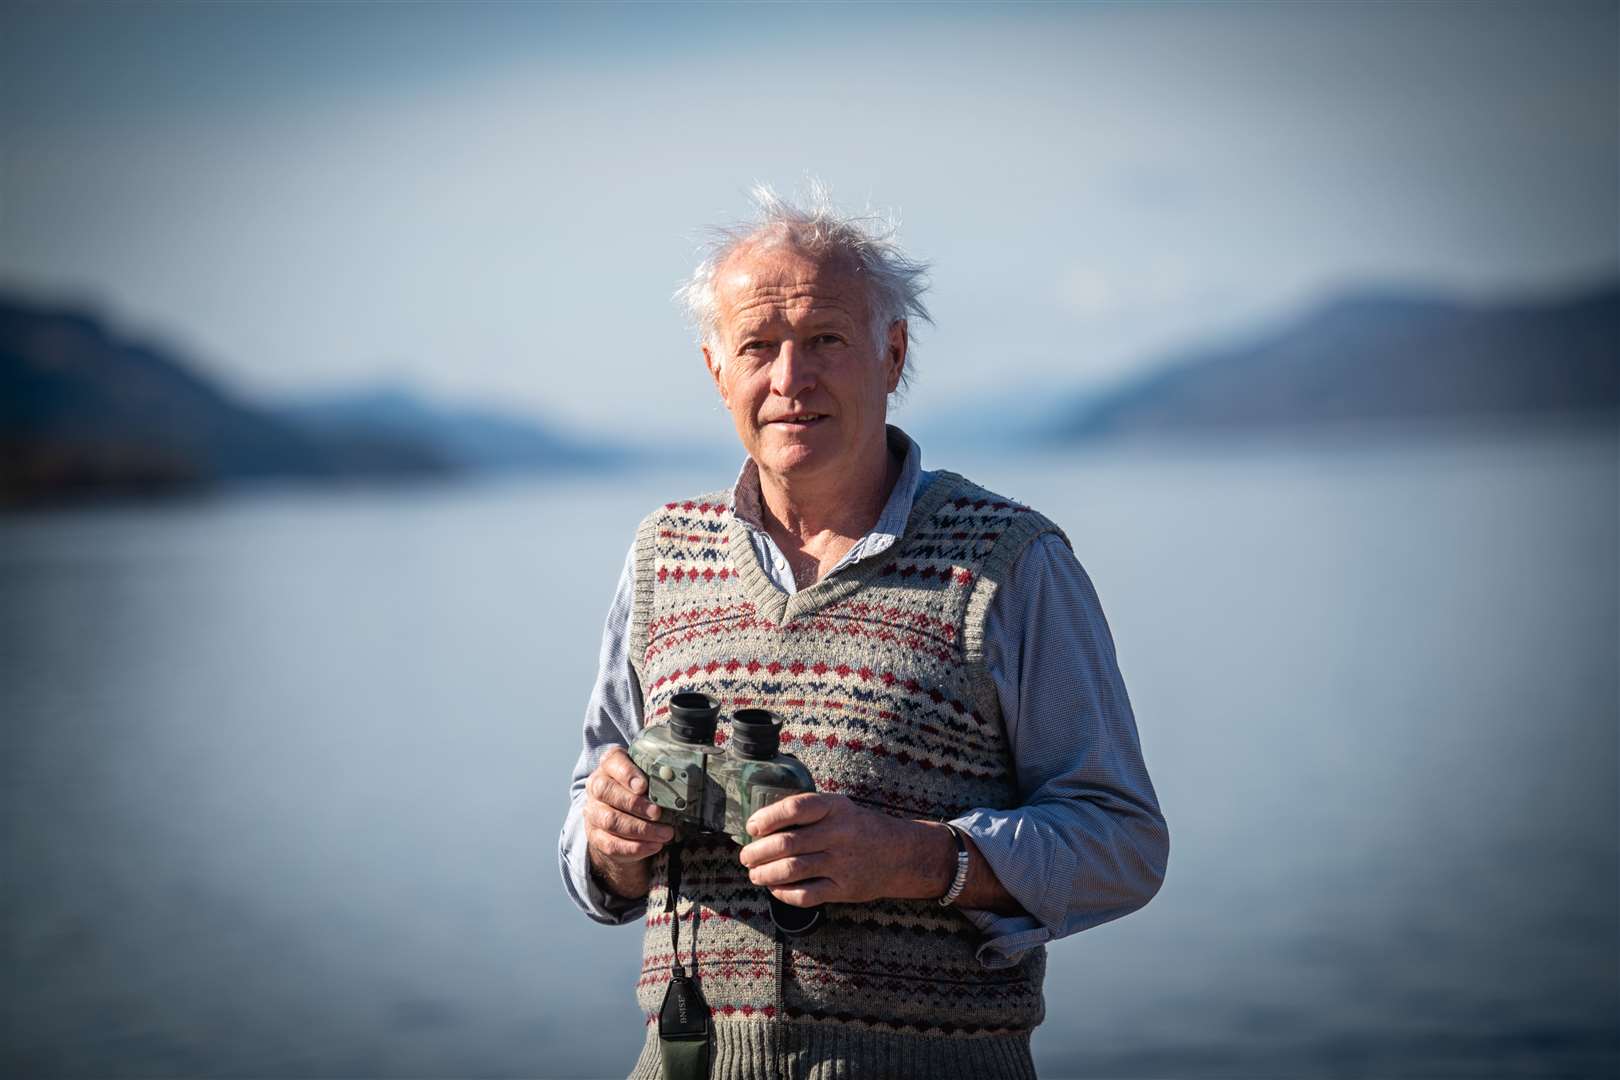 The mystery of the Loch Ness Monster led Steve Feltham to move to the area. Picture: Callum Mackay.